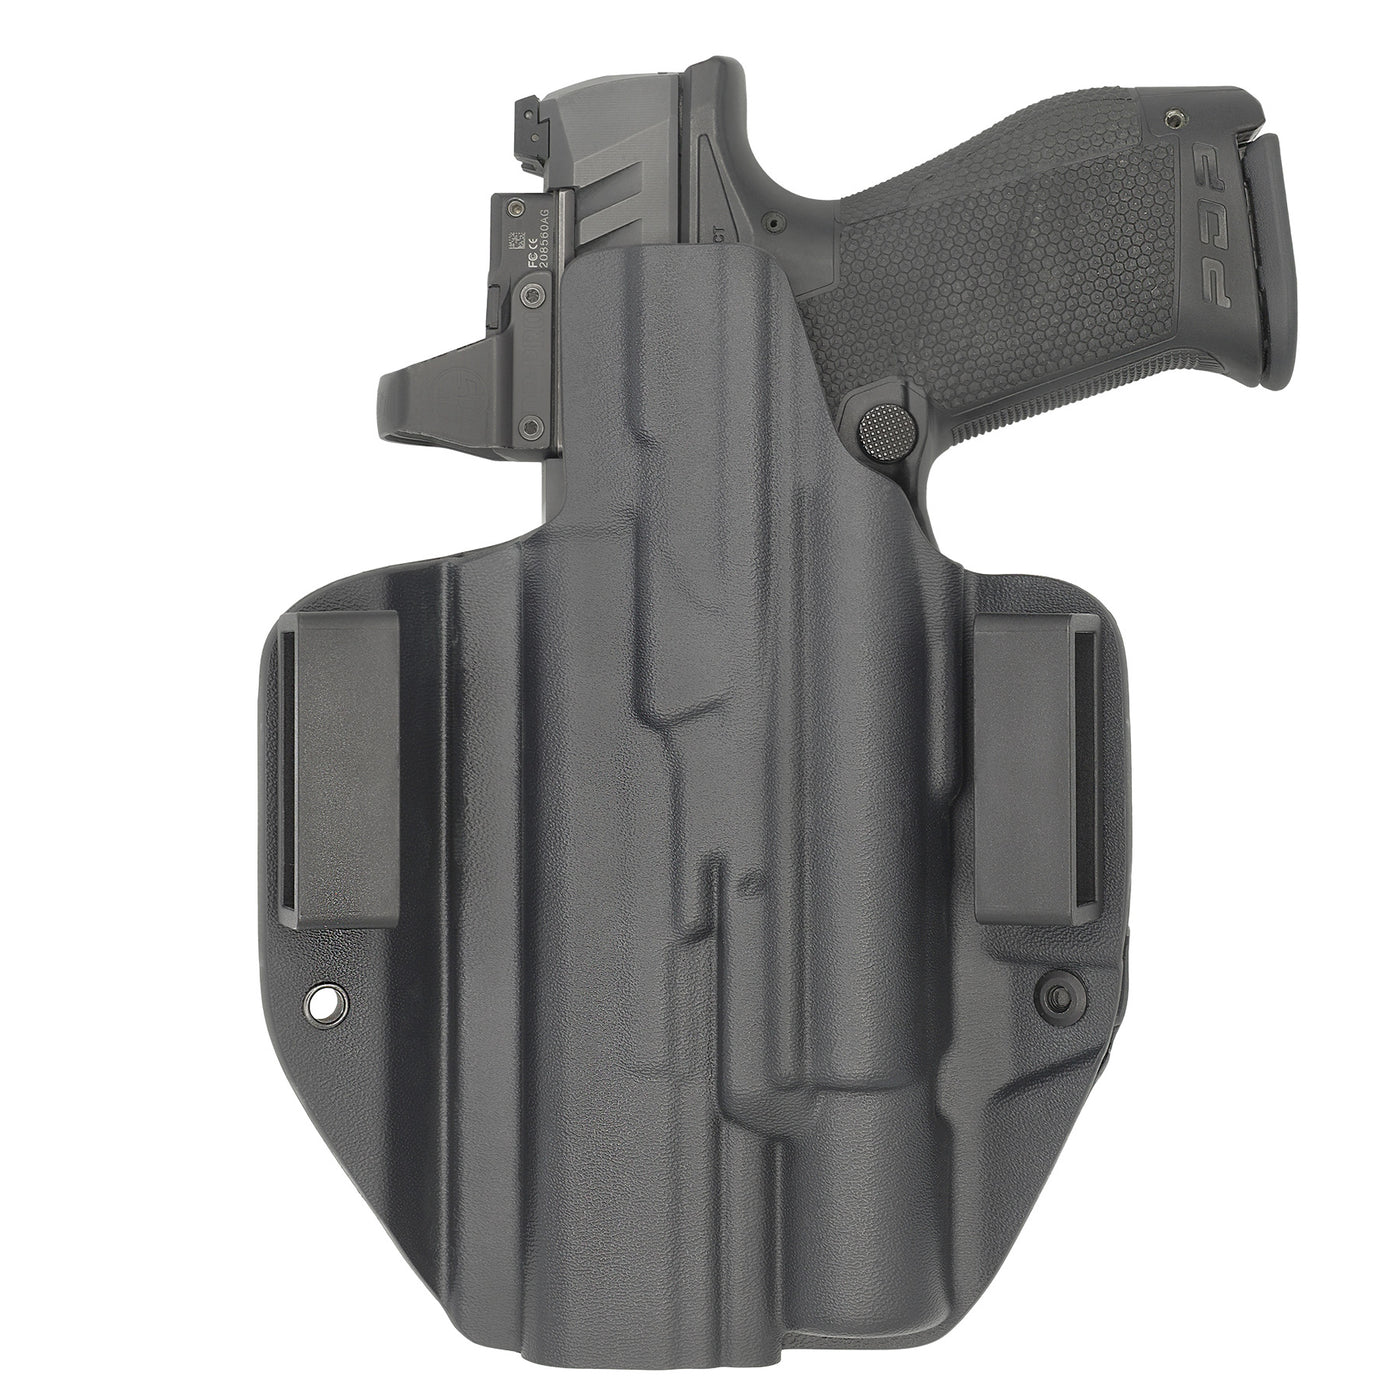 C&G Holsters custom OWB Tactical CZ P07/09 Surefire X300 in holstered position back view